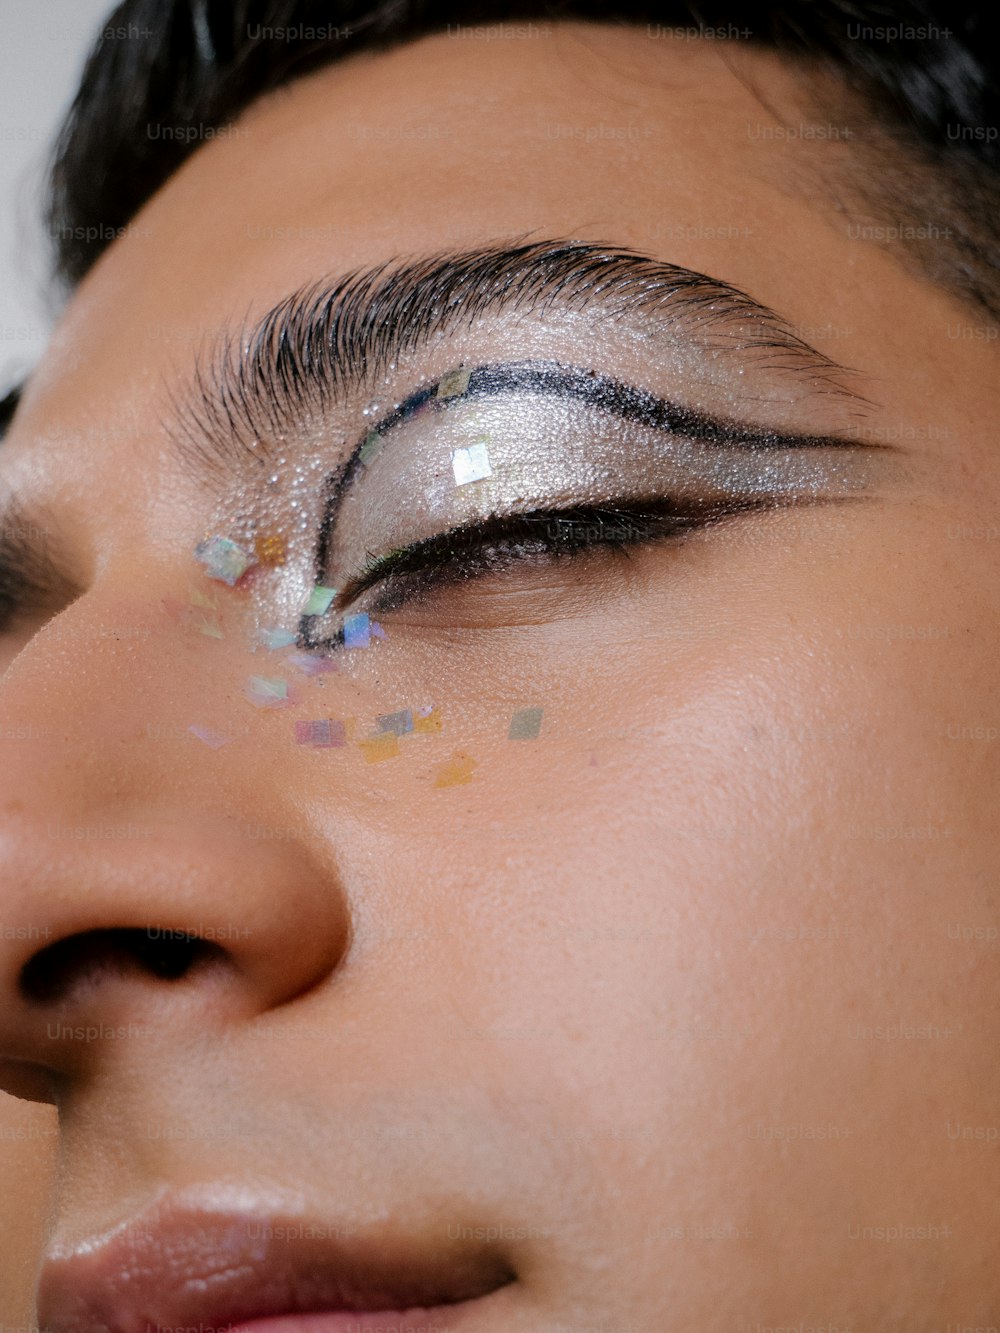 a close up of a person with makeup on